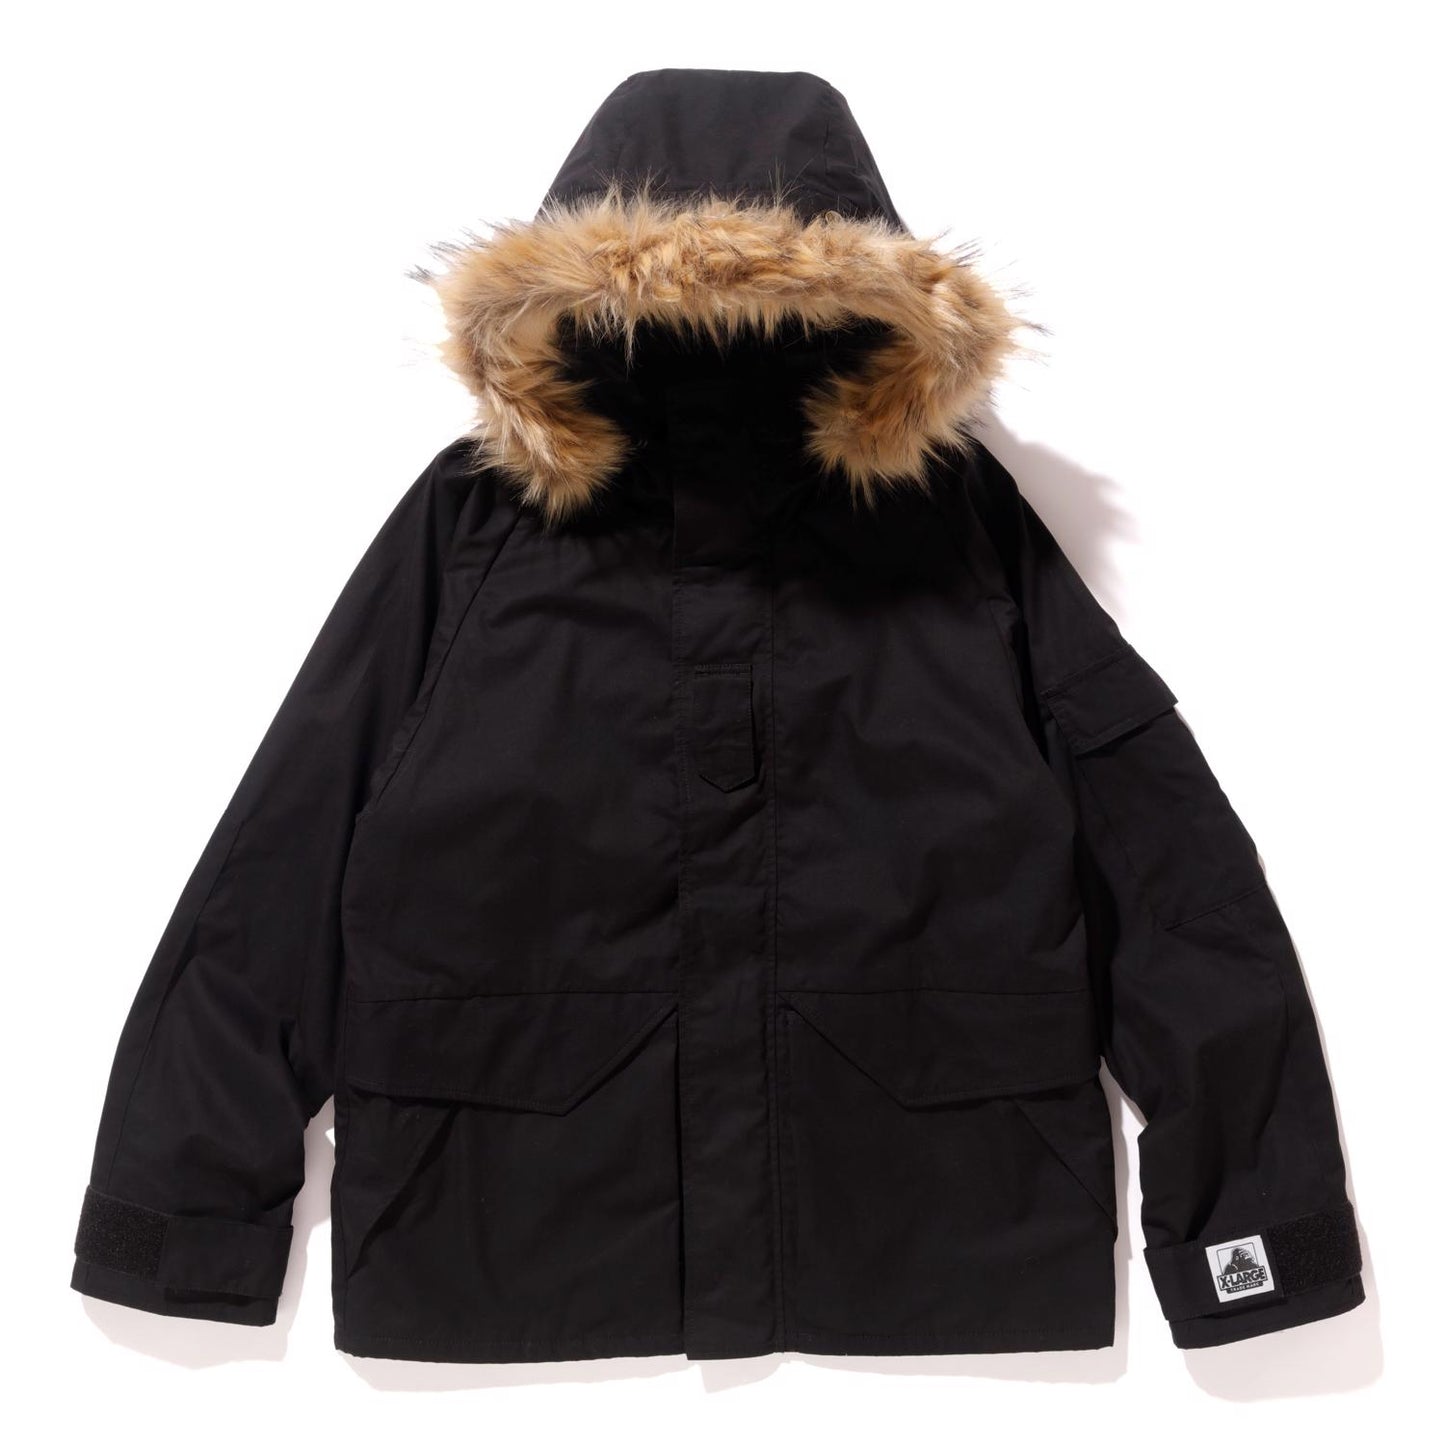 MILITARY HOODED JACKET OUTERWEAR XLARGE  